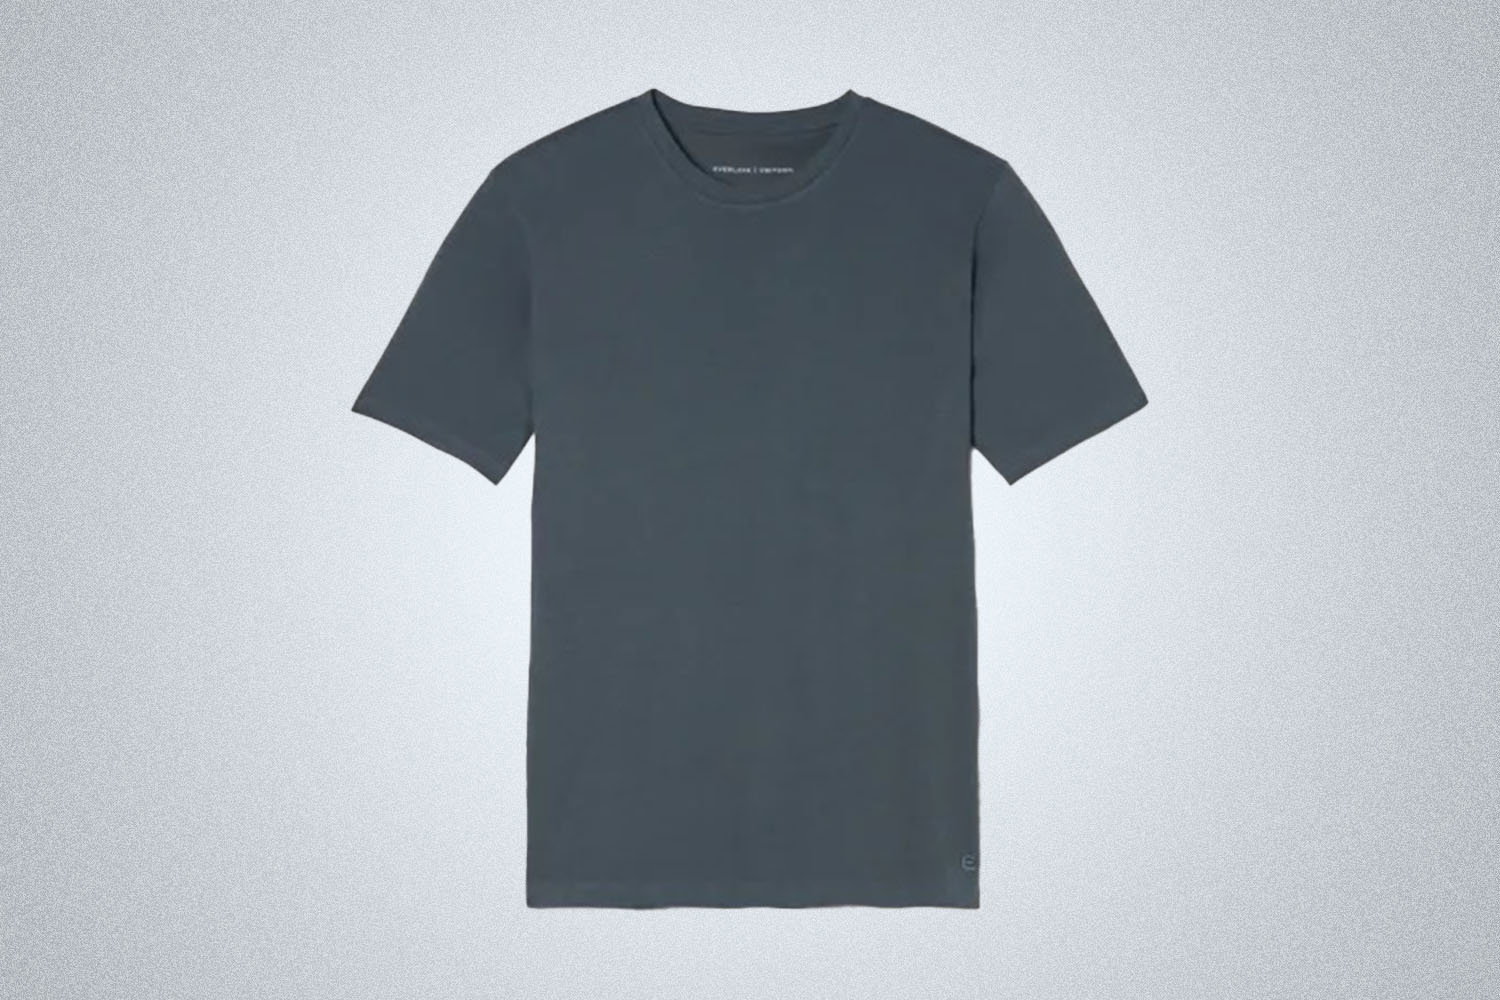 a grey short sleeve crew neck cotton tee from Everlane on a grey background